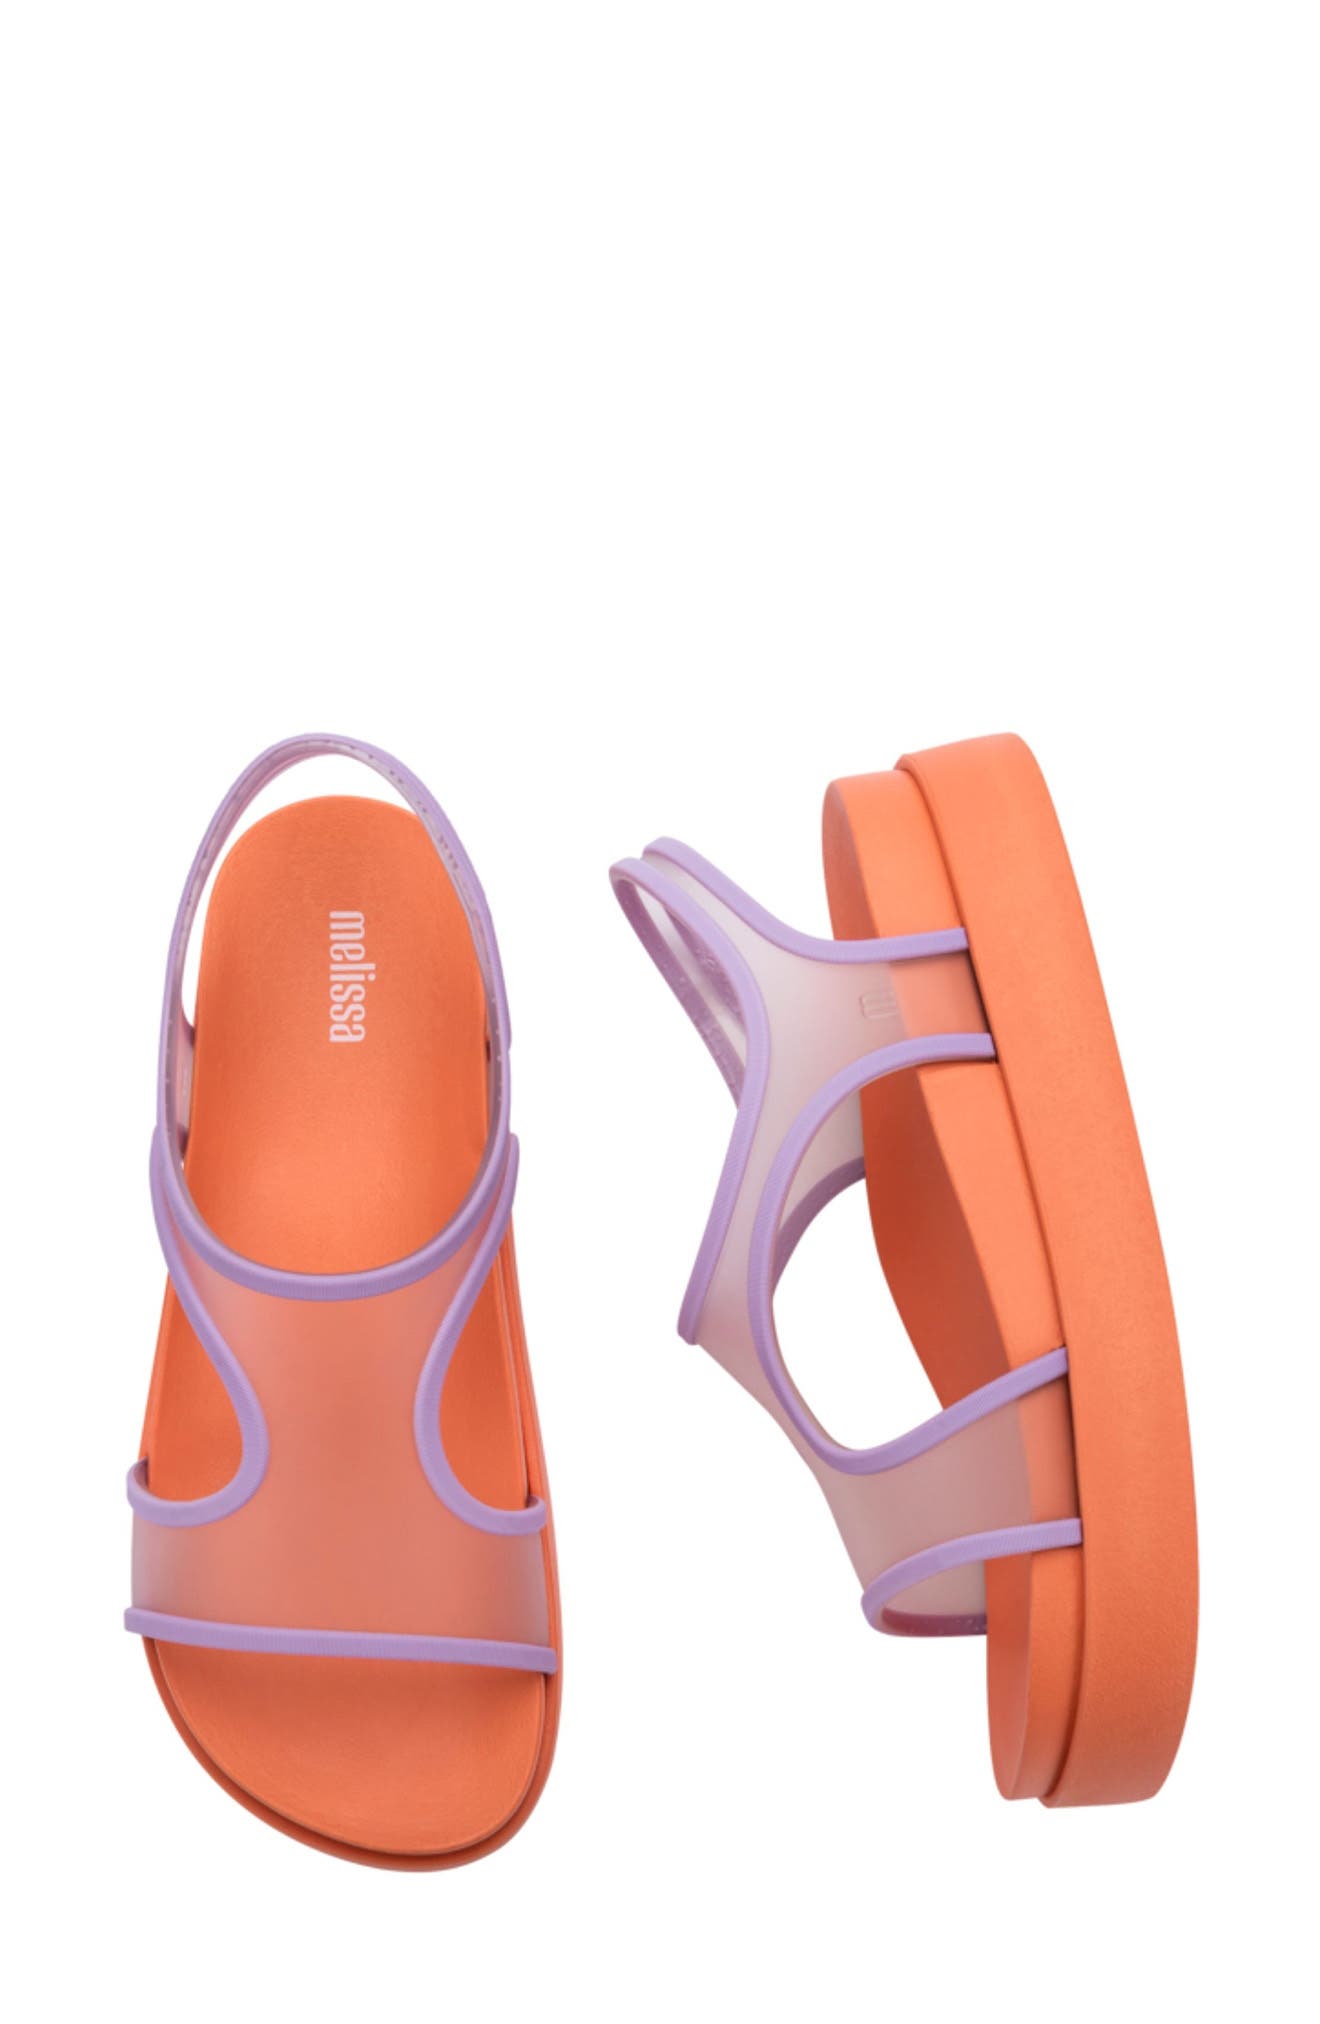 A Classic from Our Childhood UK 0.5 to 13 / EU 32 to 48 in Various Models and Colour Variations AM188 Plastic PVC Sandals/Rubber Men and Children Unisex Water Sandals for Women